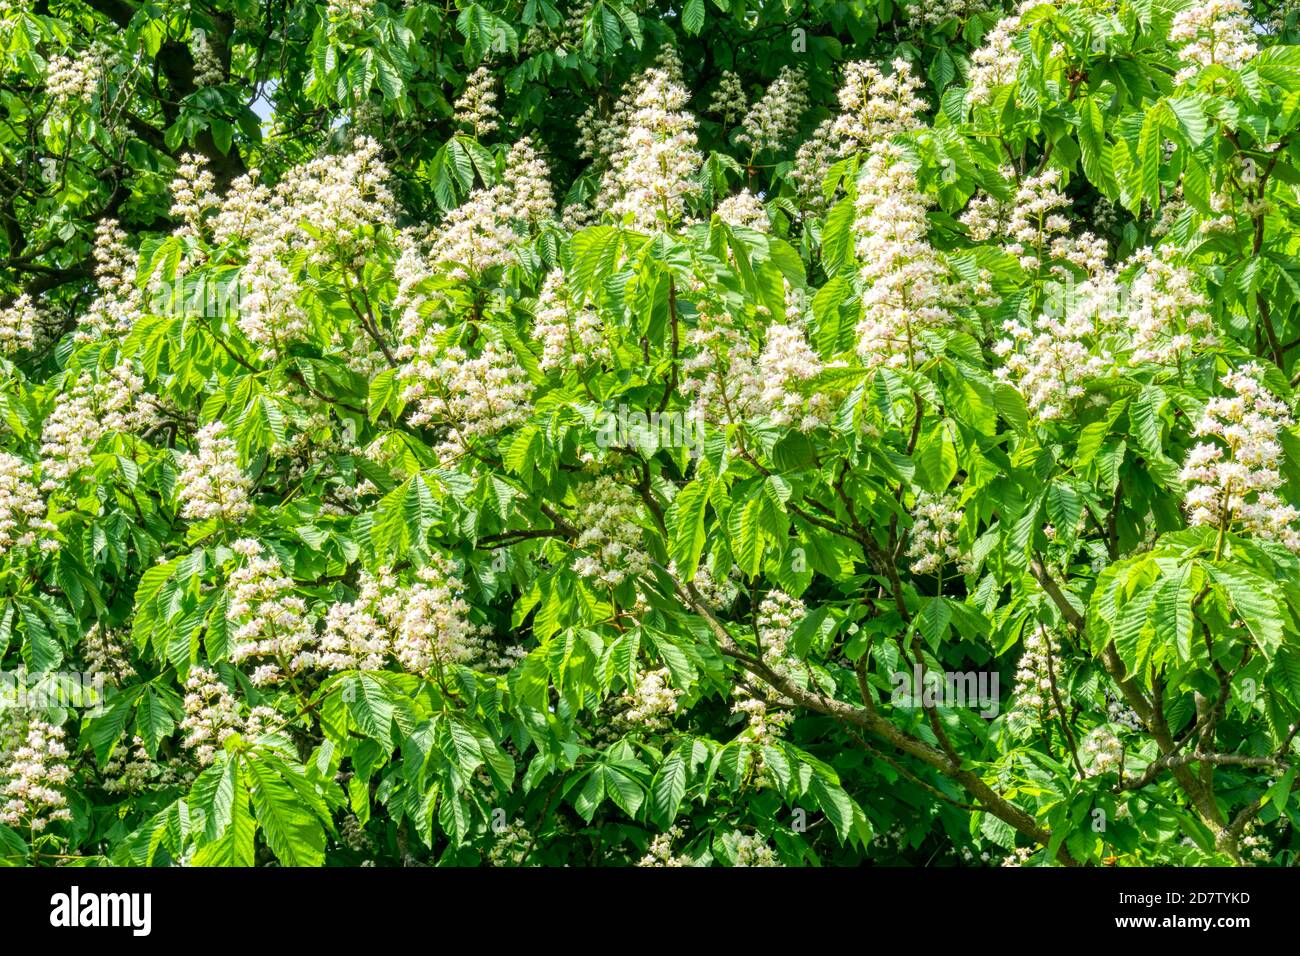 Horse chestnut flowers or candles, Aesculus hippocastanum. Stock Photo